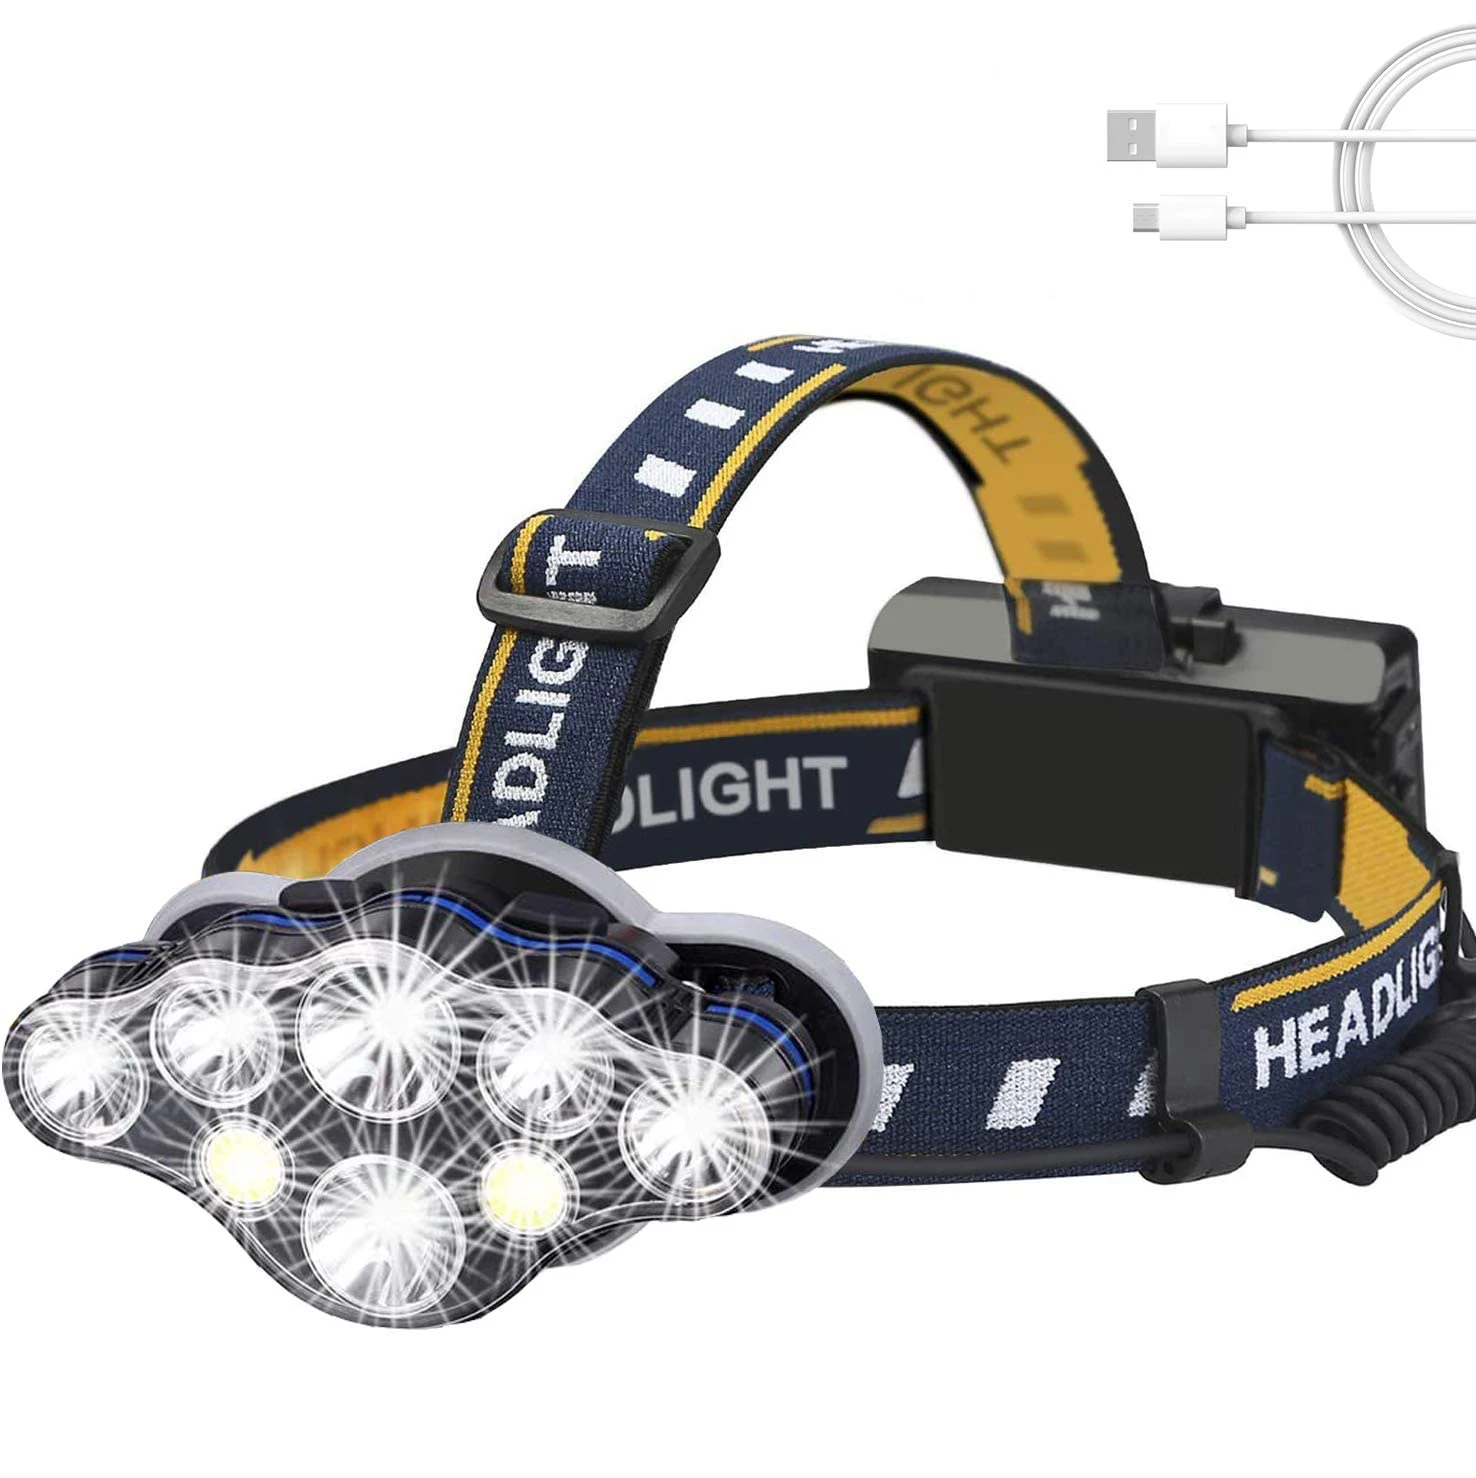 LED Headlamp Flashligh CREE 6 LED Lamp 8 Modes Waterproof USB Rechargeable Headlight for Reading Outdoor Running Camping Fishing Walking 